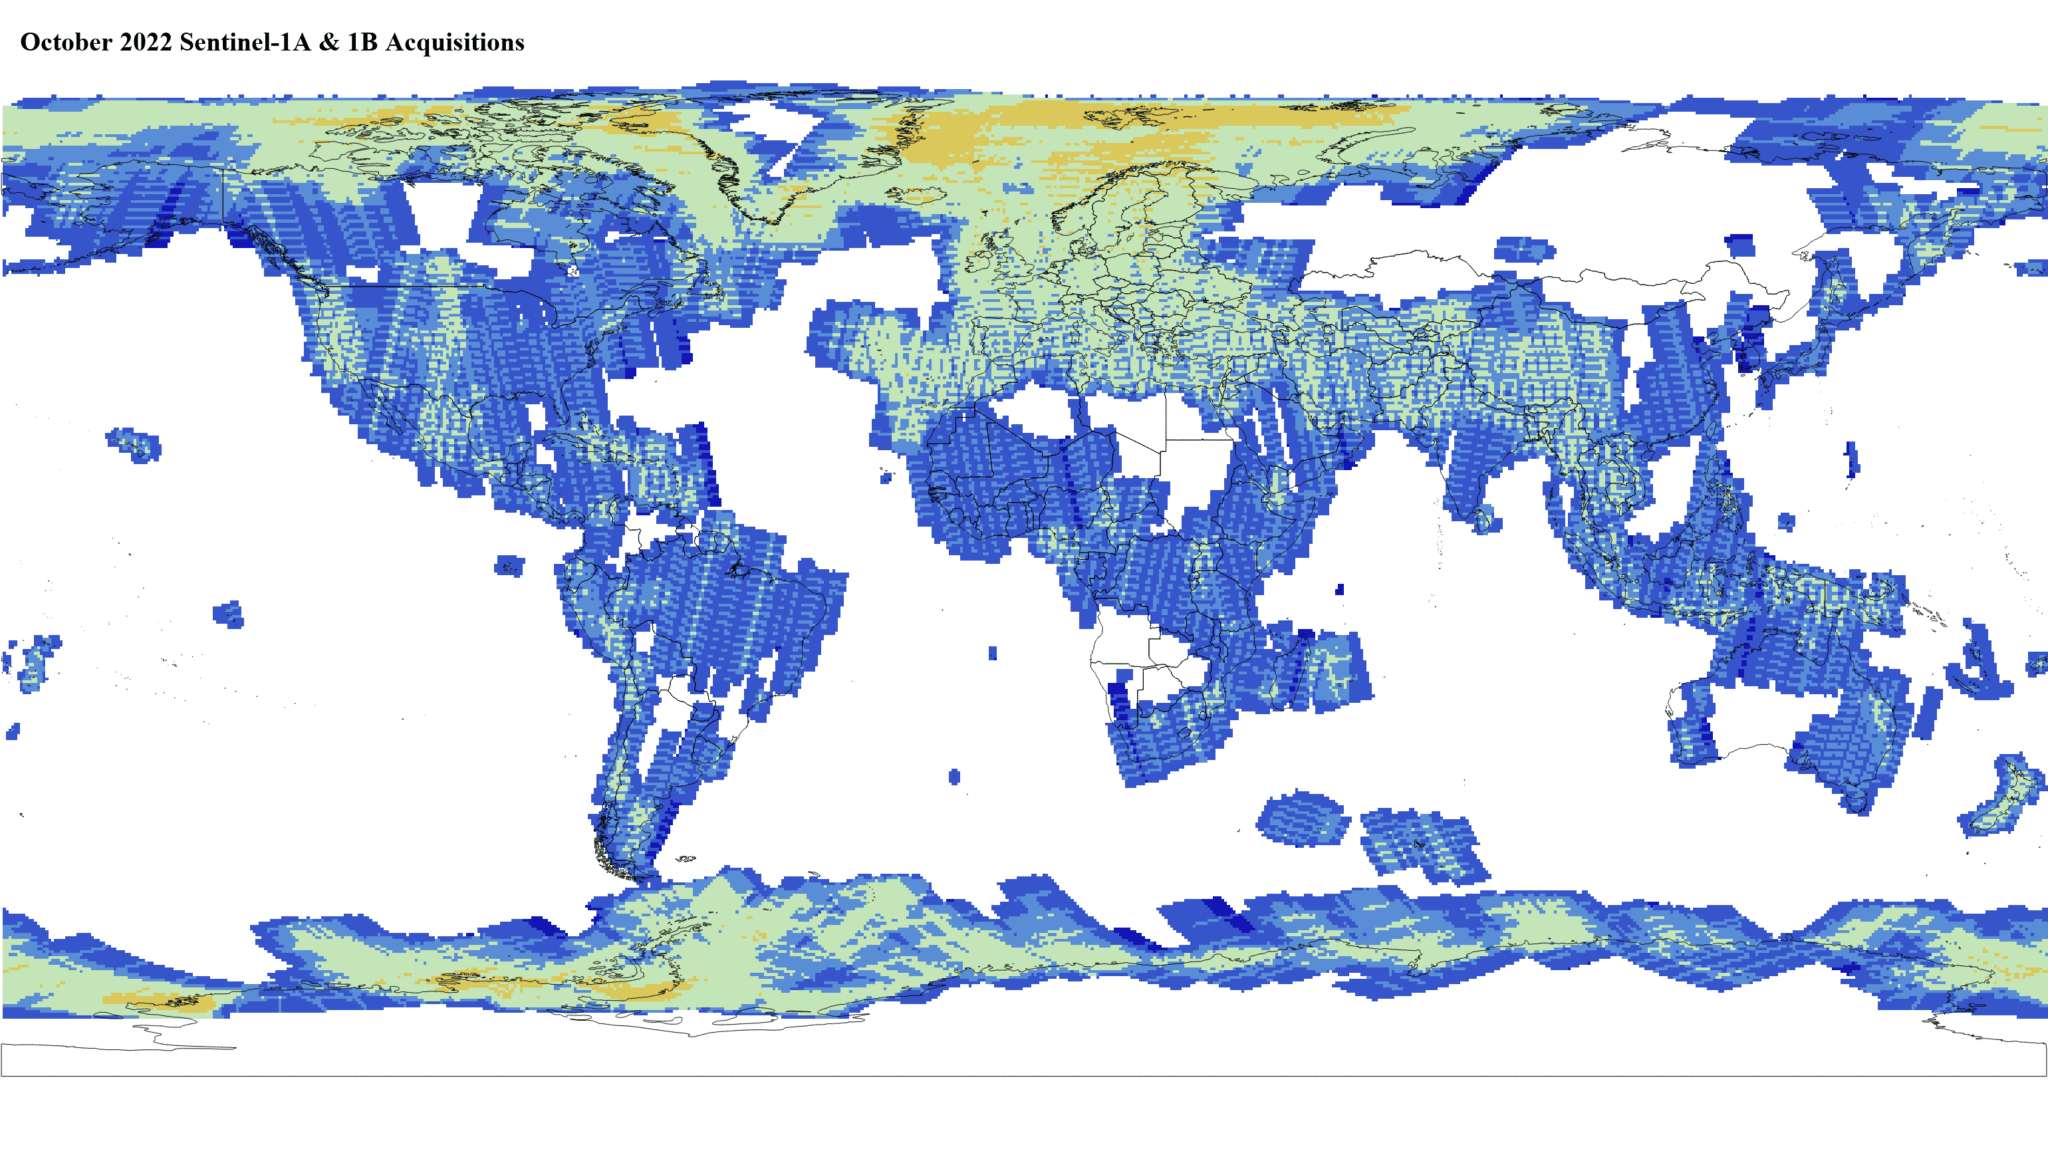 Heat map of Sentinel-1A and -1B GRD global acquisitions October 2022